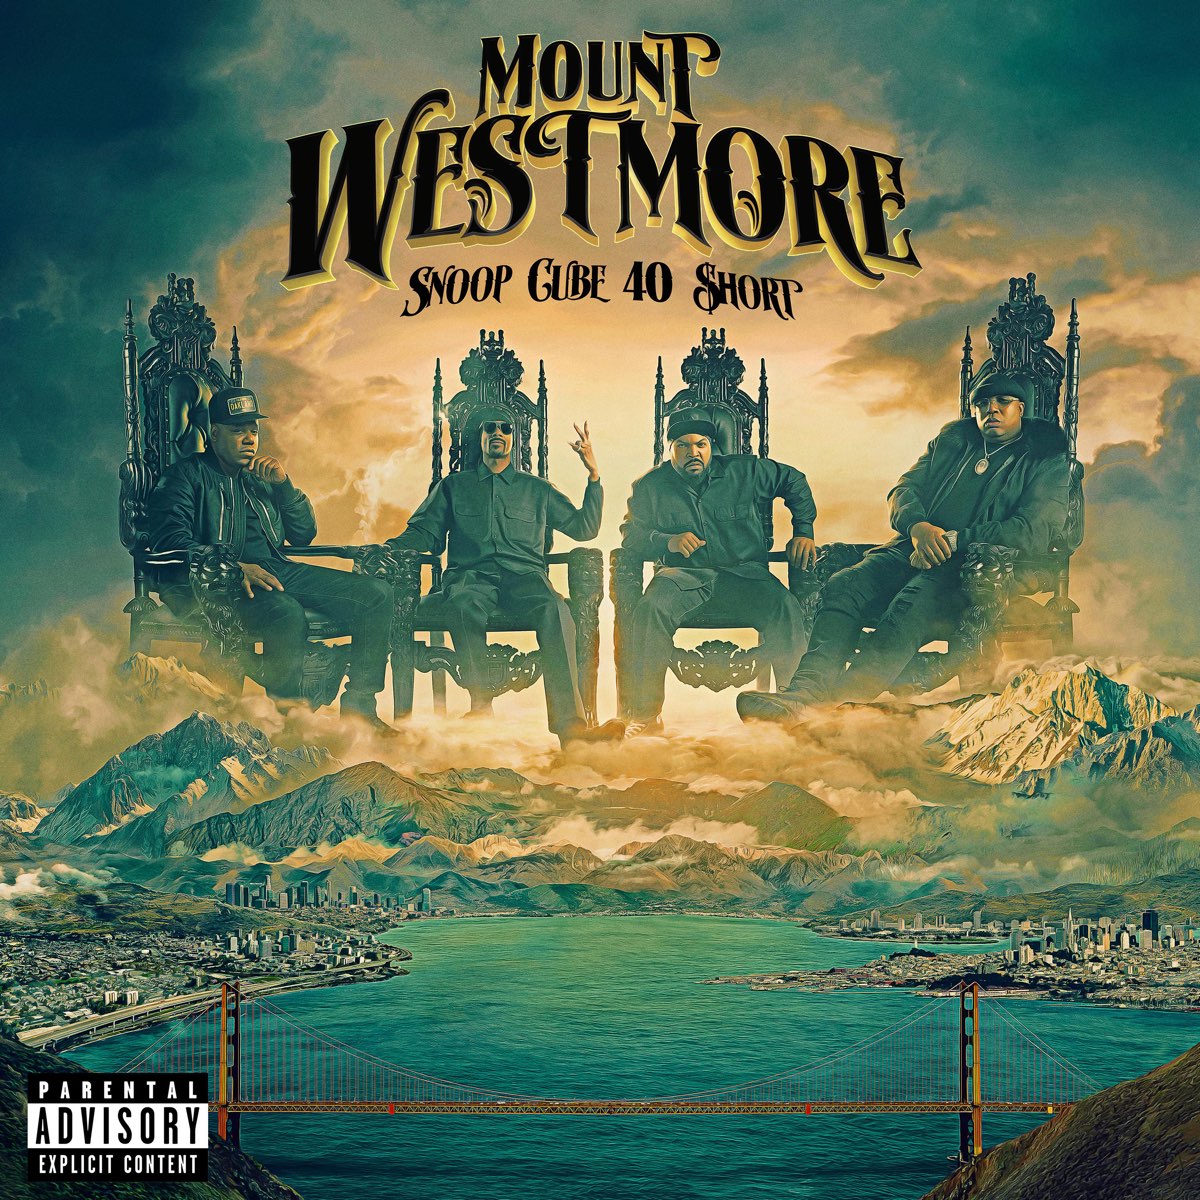 Snoop Dogg, Ice Cube, E-40, & Too $hort Are Mount Westmore, Drop Debut Album